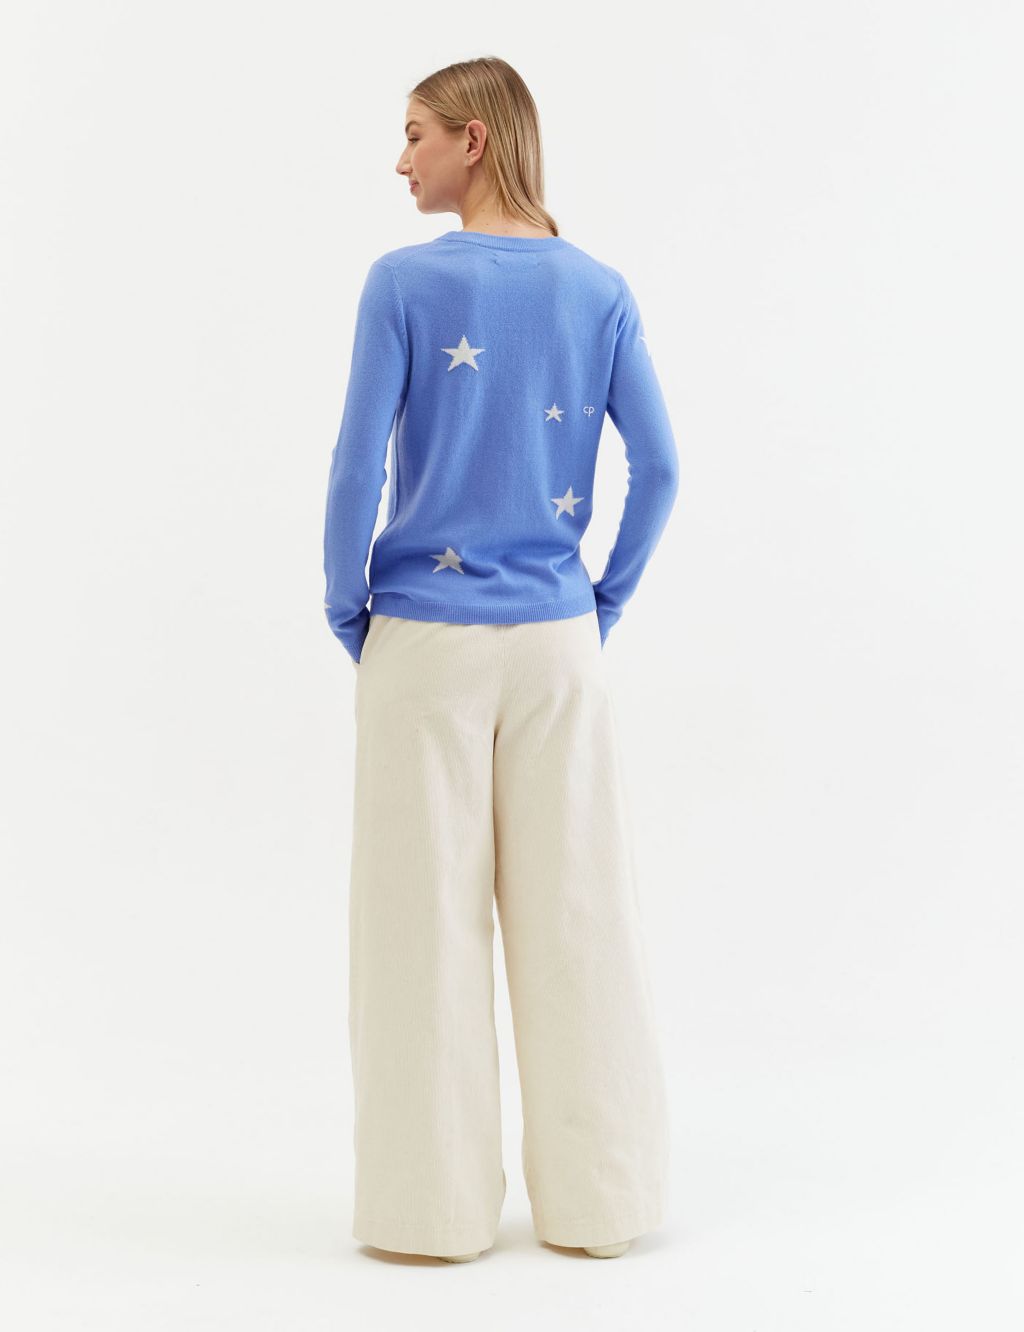 Wool Rich Star Jumper with Cashmere image 3